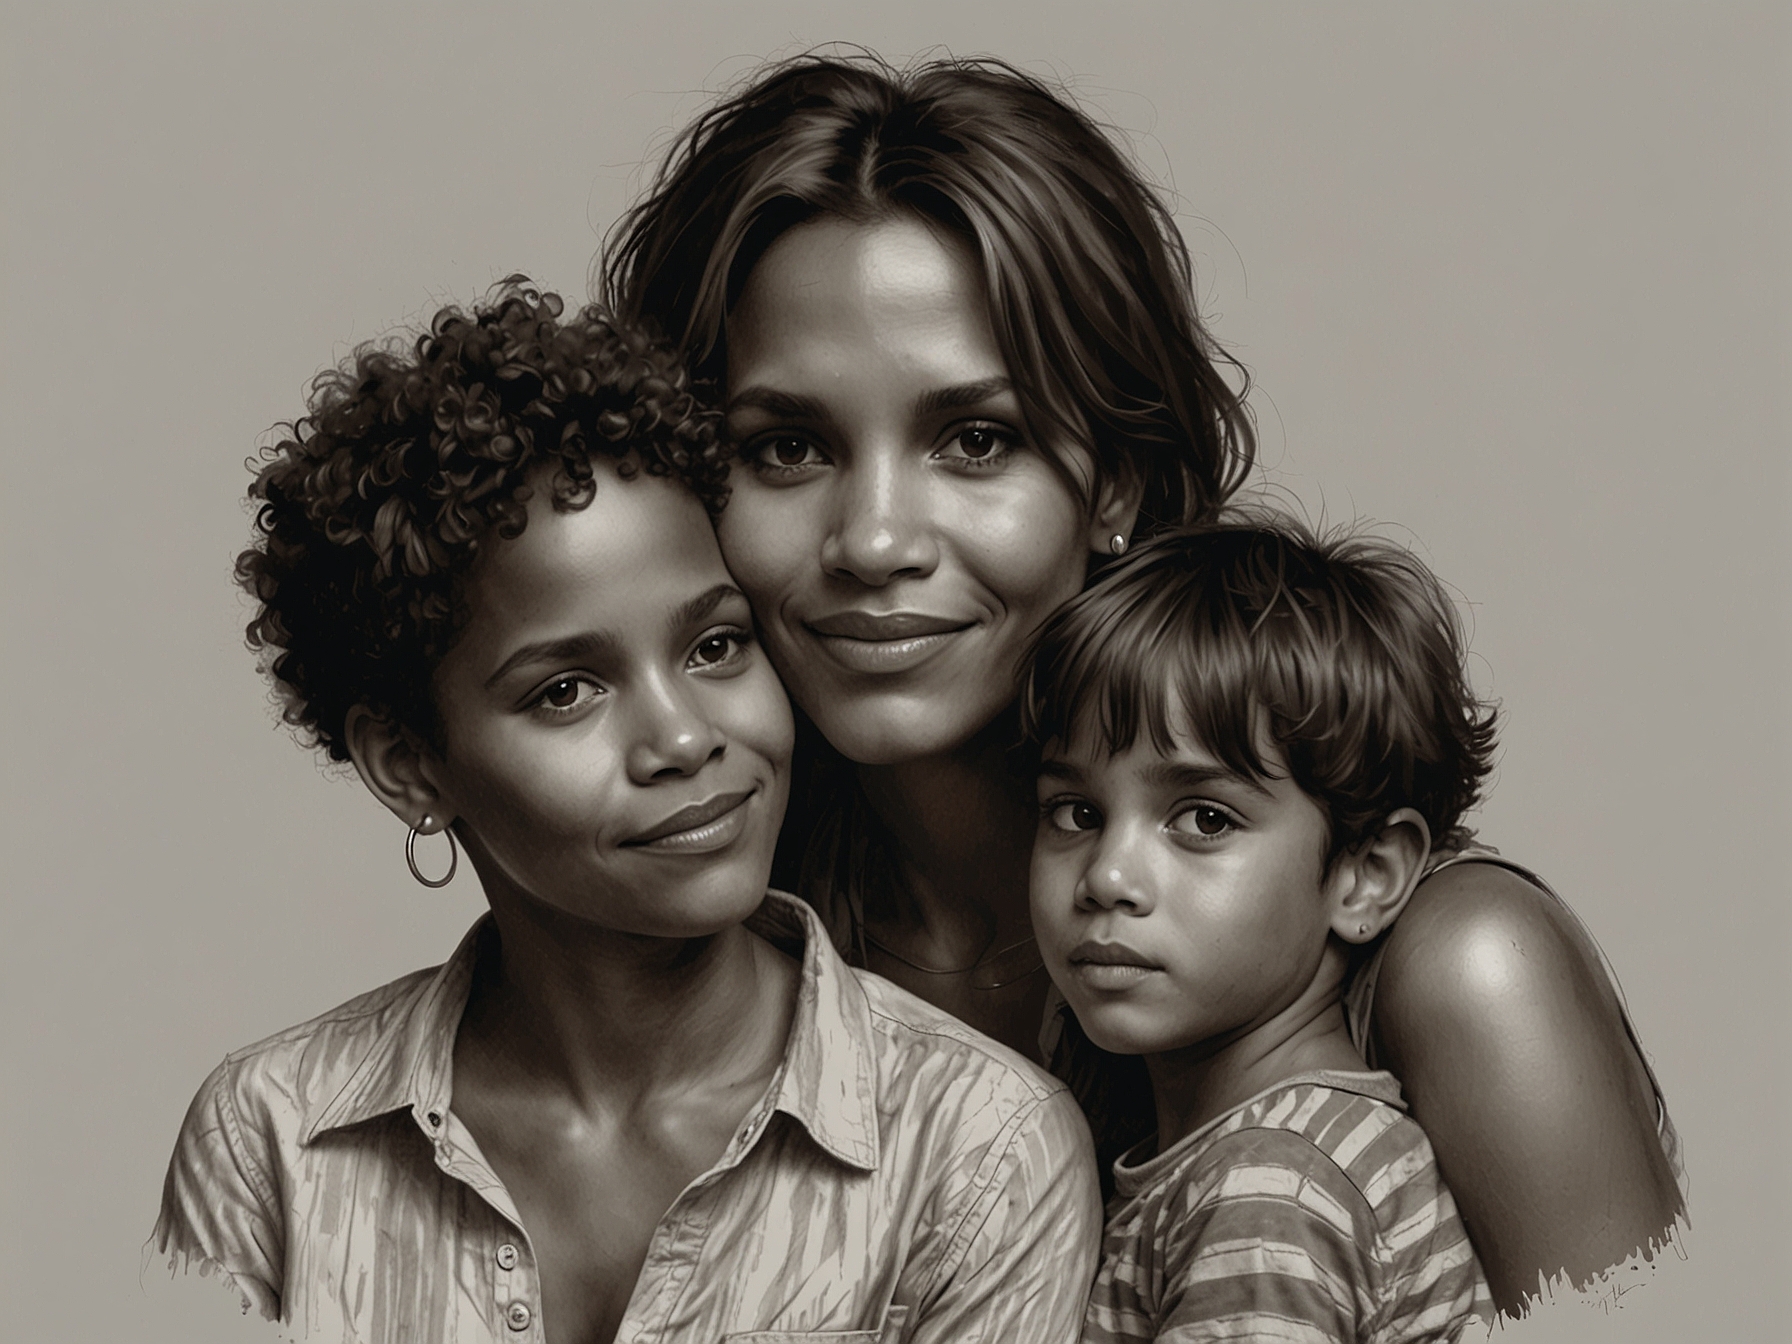 A warm and intimate family portrait of Halle Berry with her two biological children, illustrating her dedication to family and the importance of cultural and emotional connections.